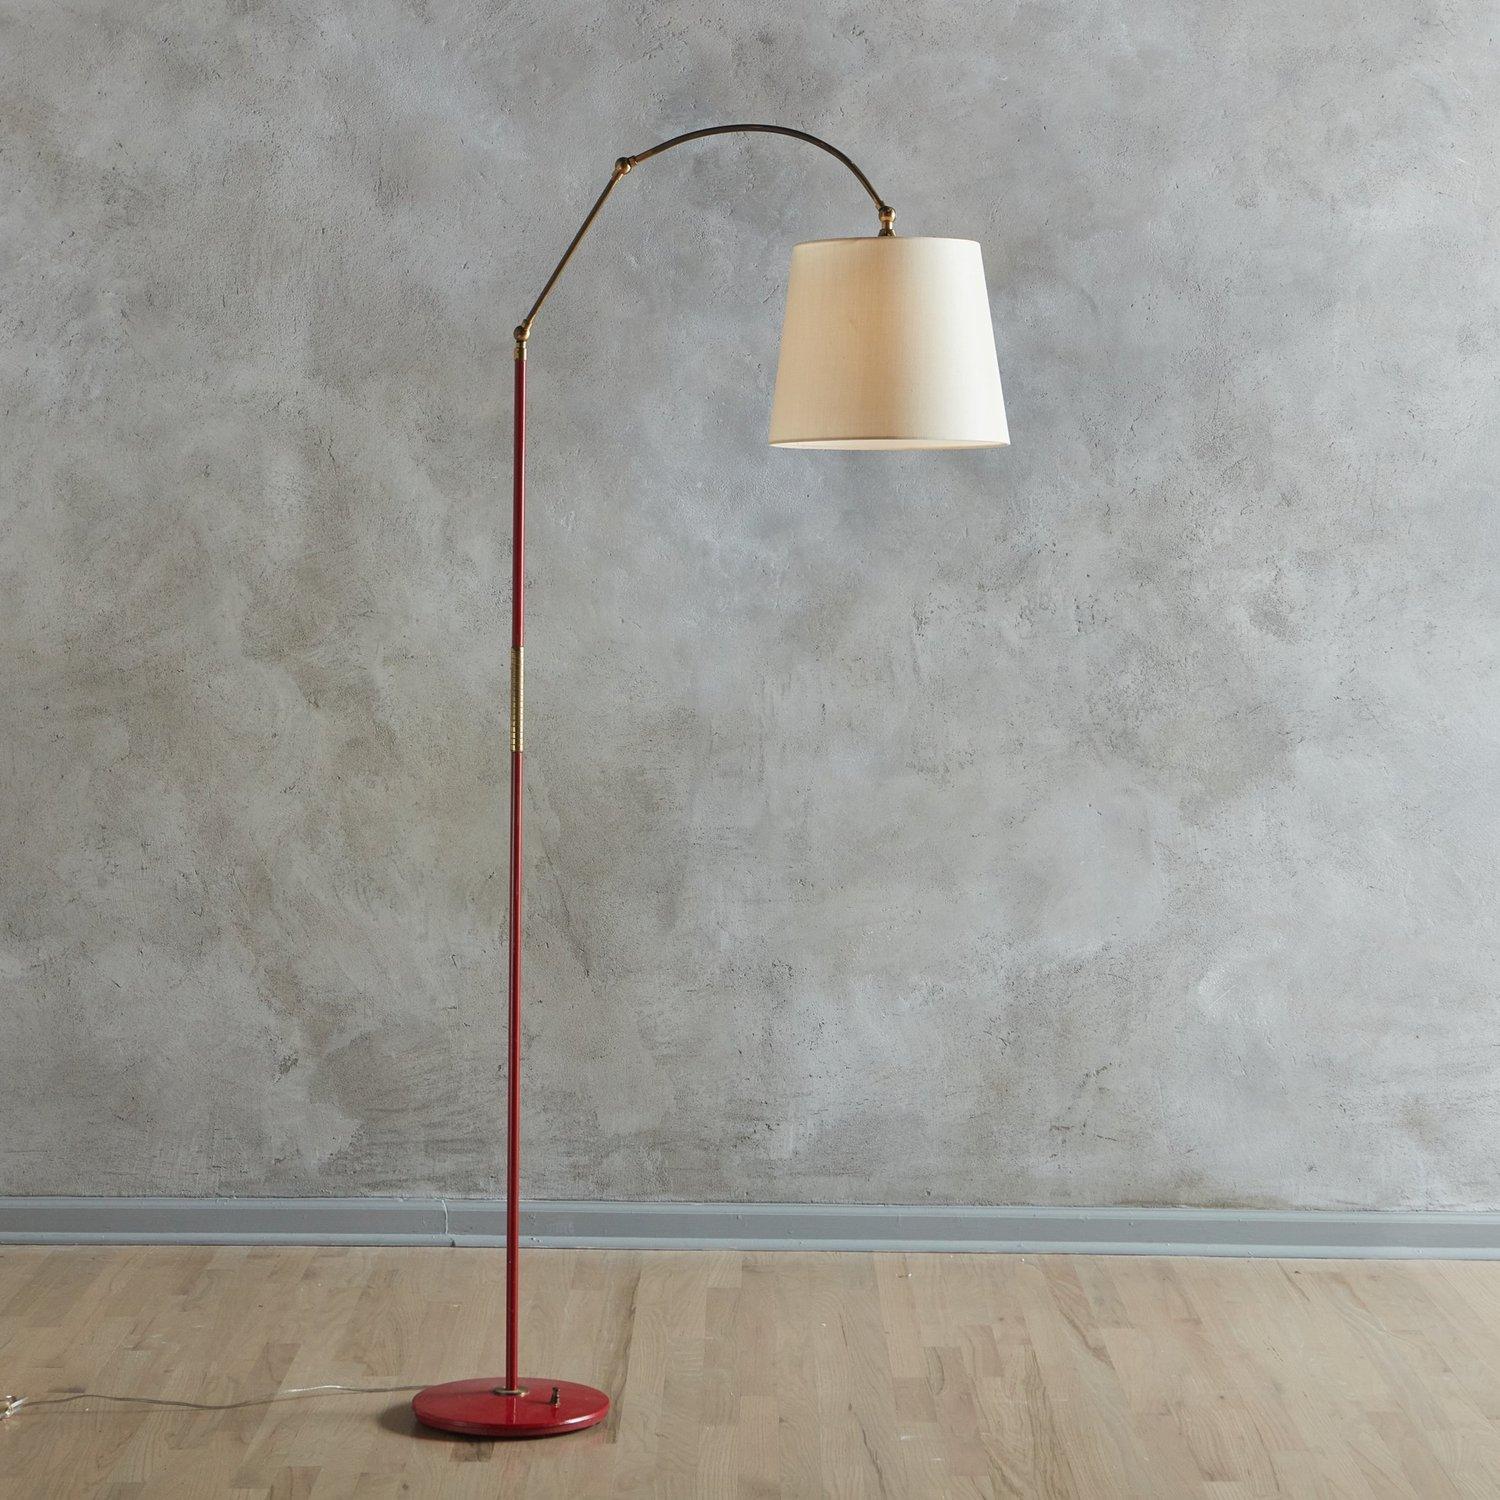 A 1960s Italian floor lamp in the style of Angelo Lelli featuring a sleek tubular red metal body with a circular base. This lamp has a patinated brass pivoting and adjustable arm with two joints, which allows the light to be directed in a variety of